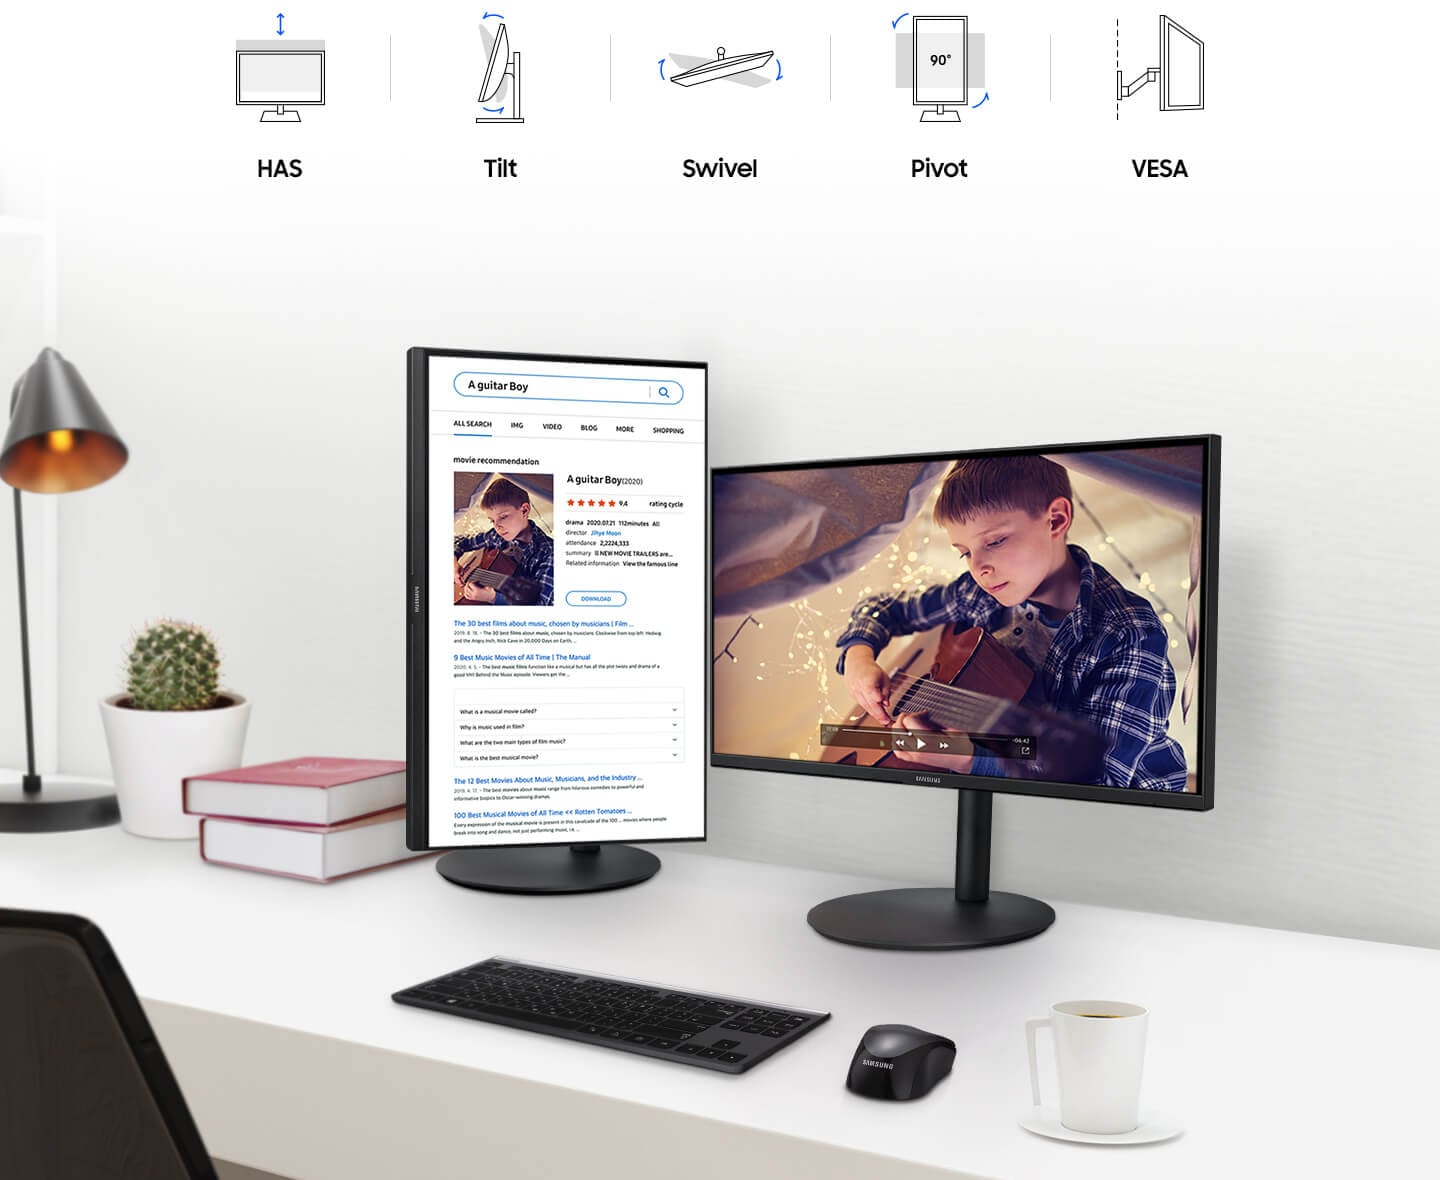 Dual monitors, one is tilted and the other portrait, are set on the home table with icons showing ergonomic features.